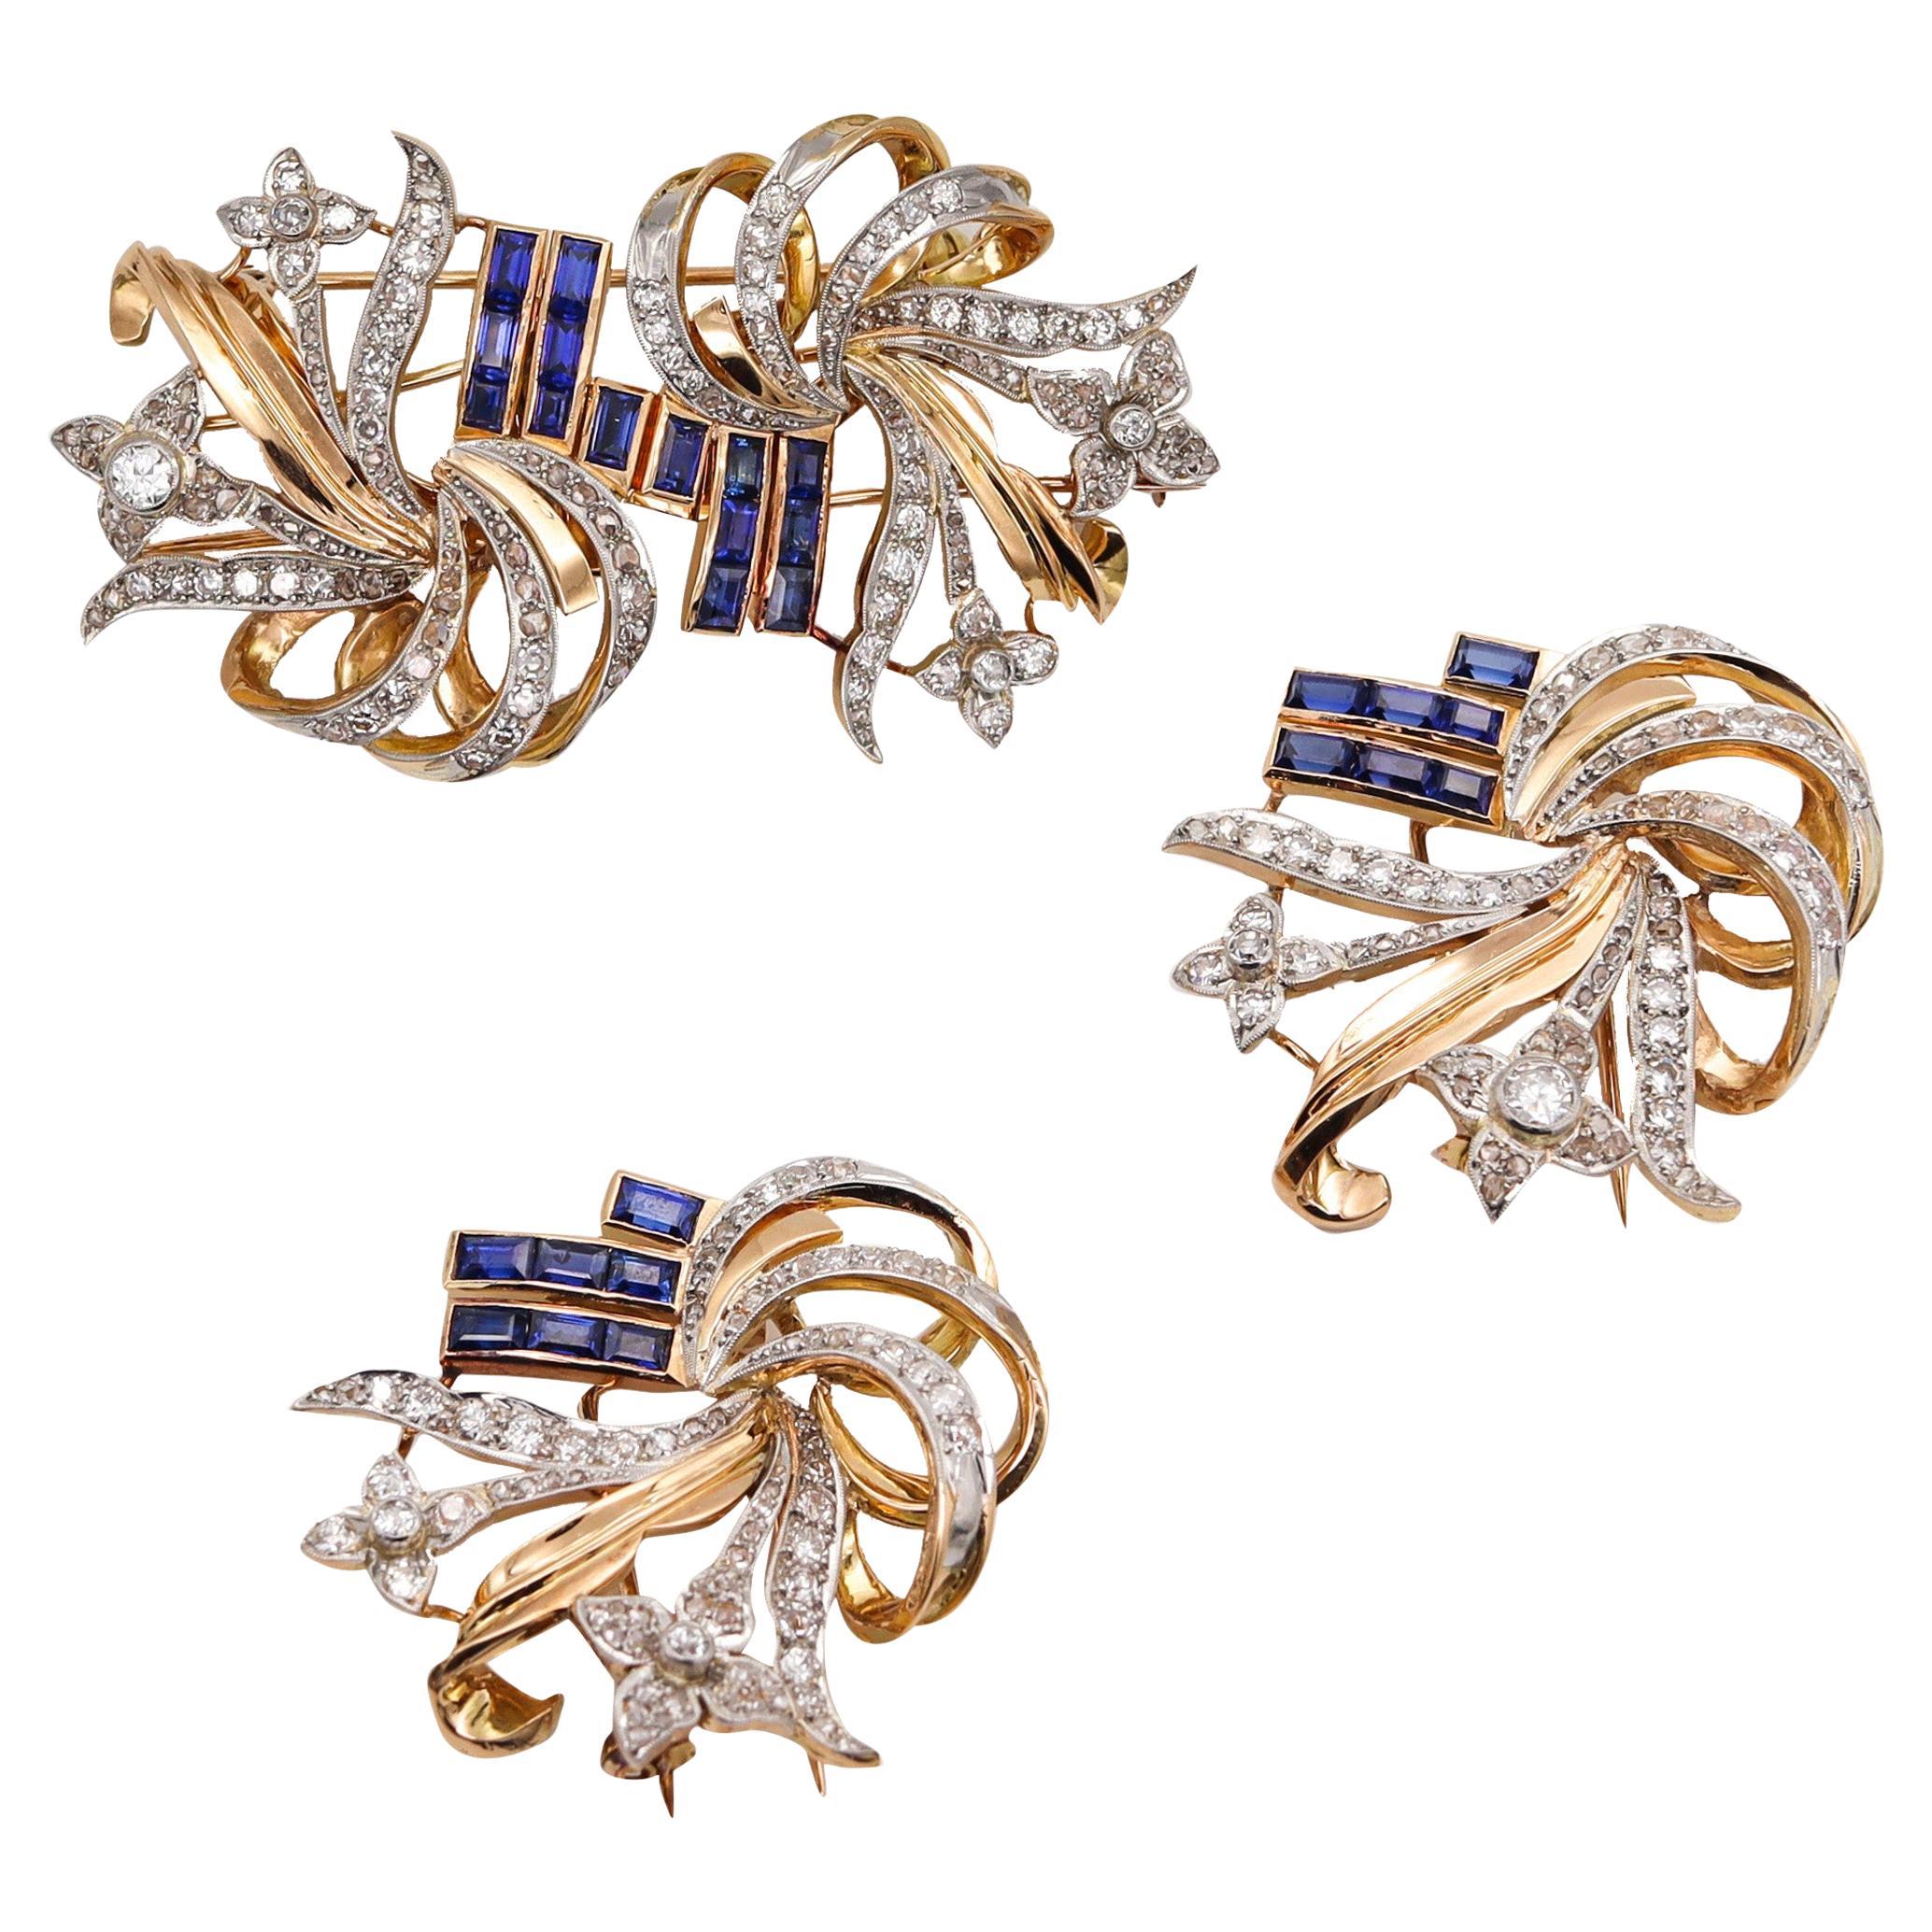 Art Deco Retro 1935 Convertible Clips 18kt Gold with 7.08ctw Diamonds & Spinels